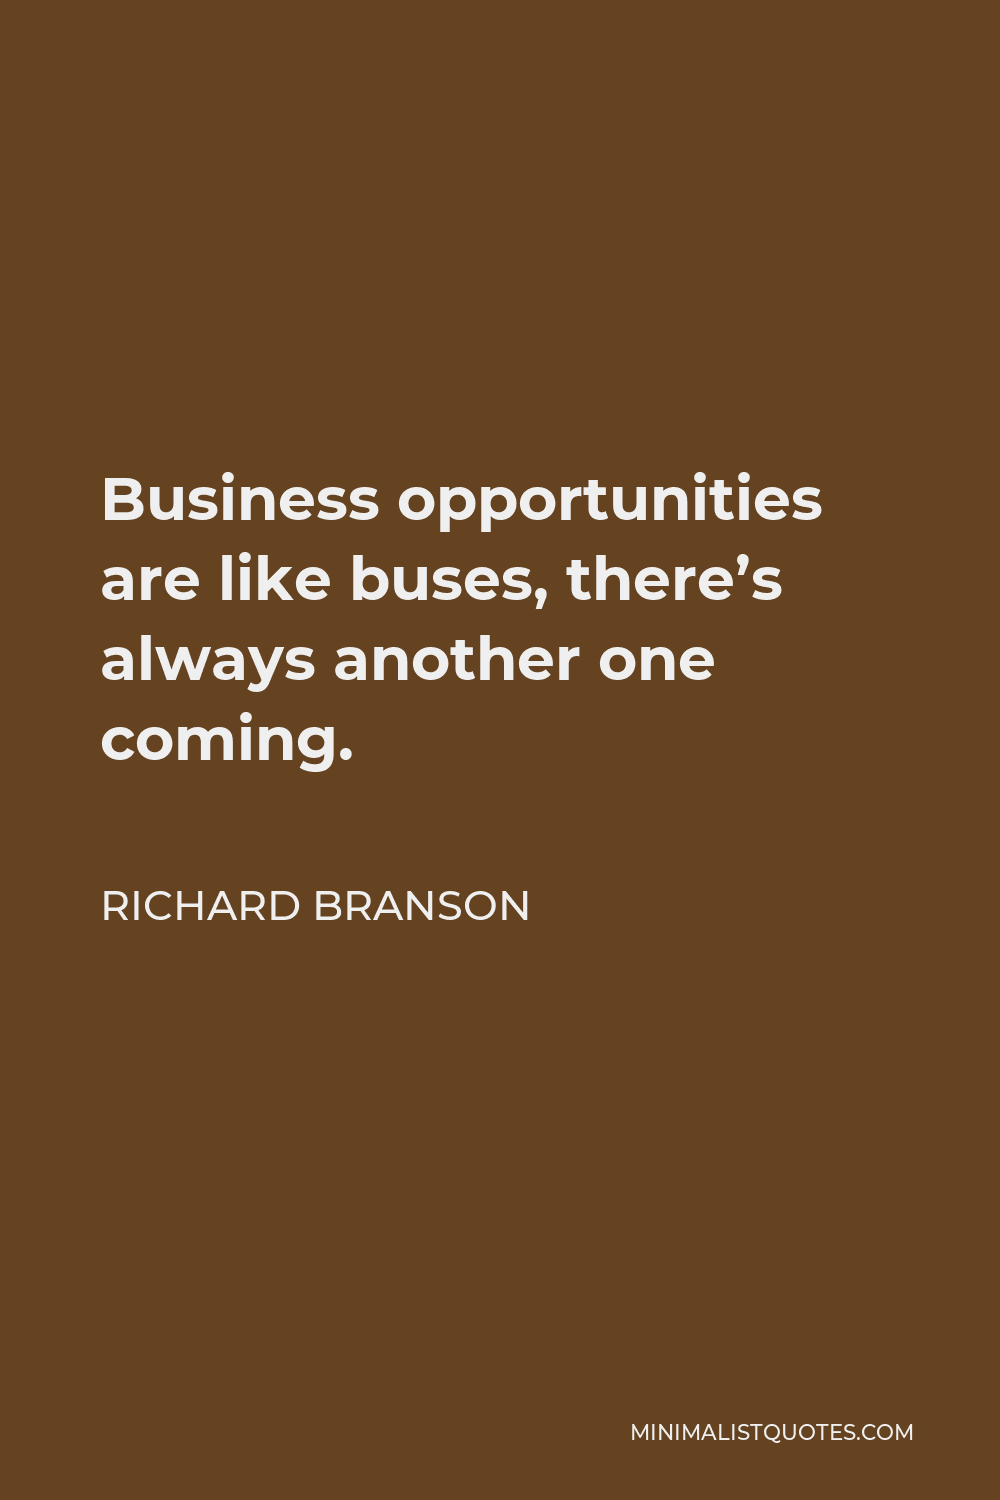 Richard Branson Quote - Business opportunities are like buses, there’s always another one coming.